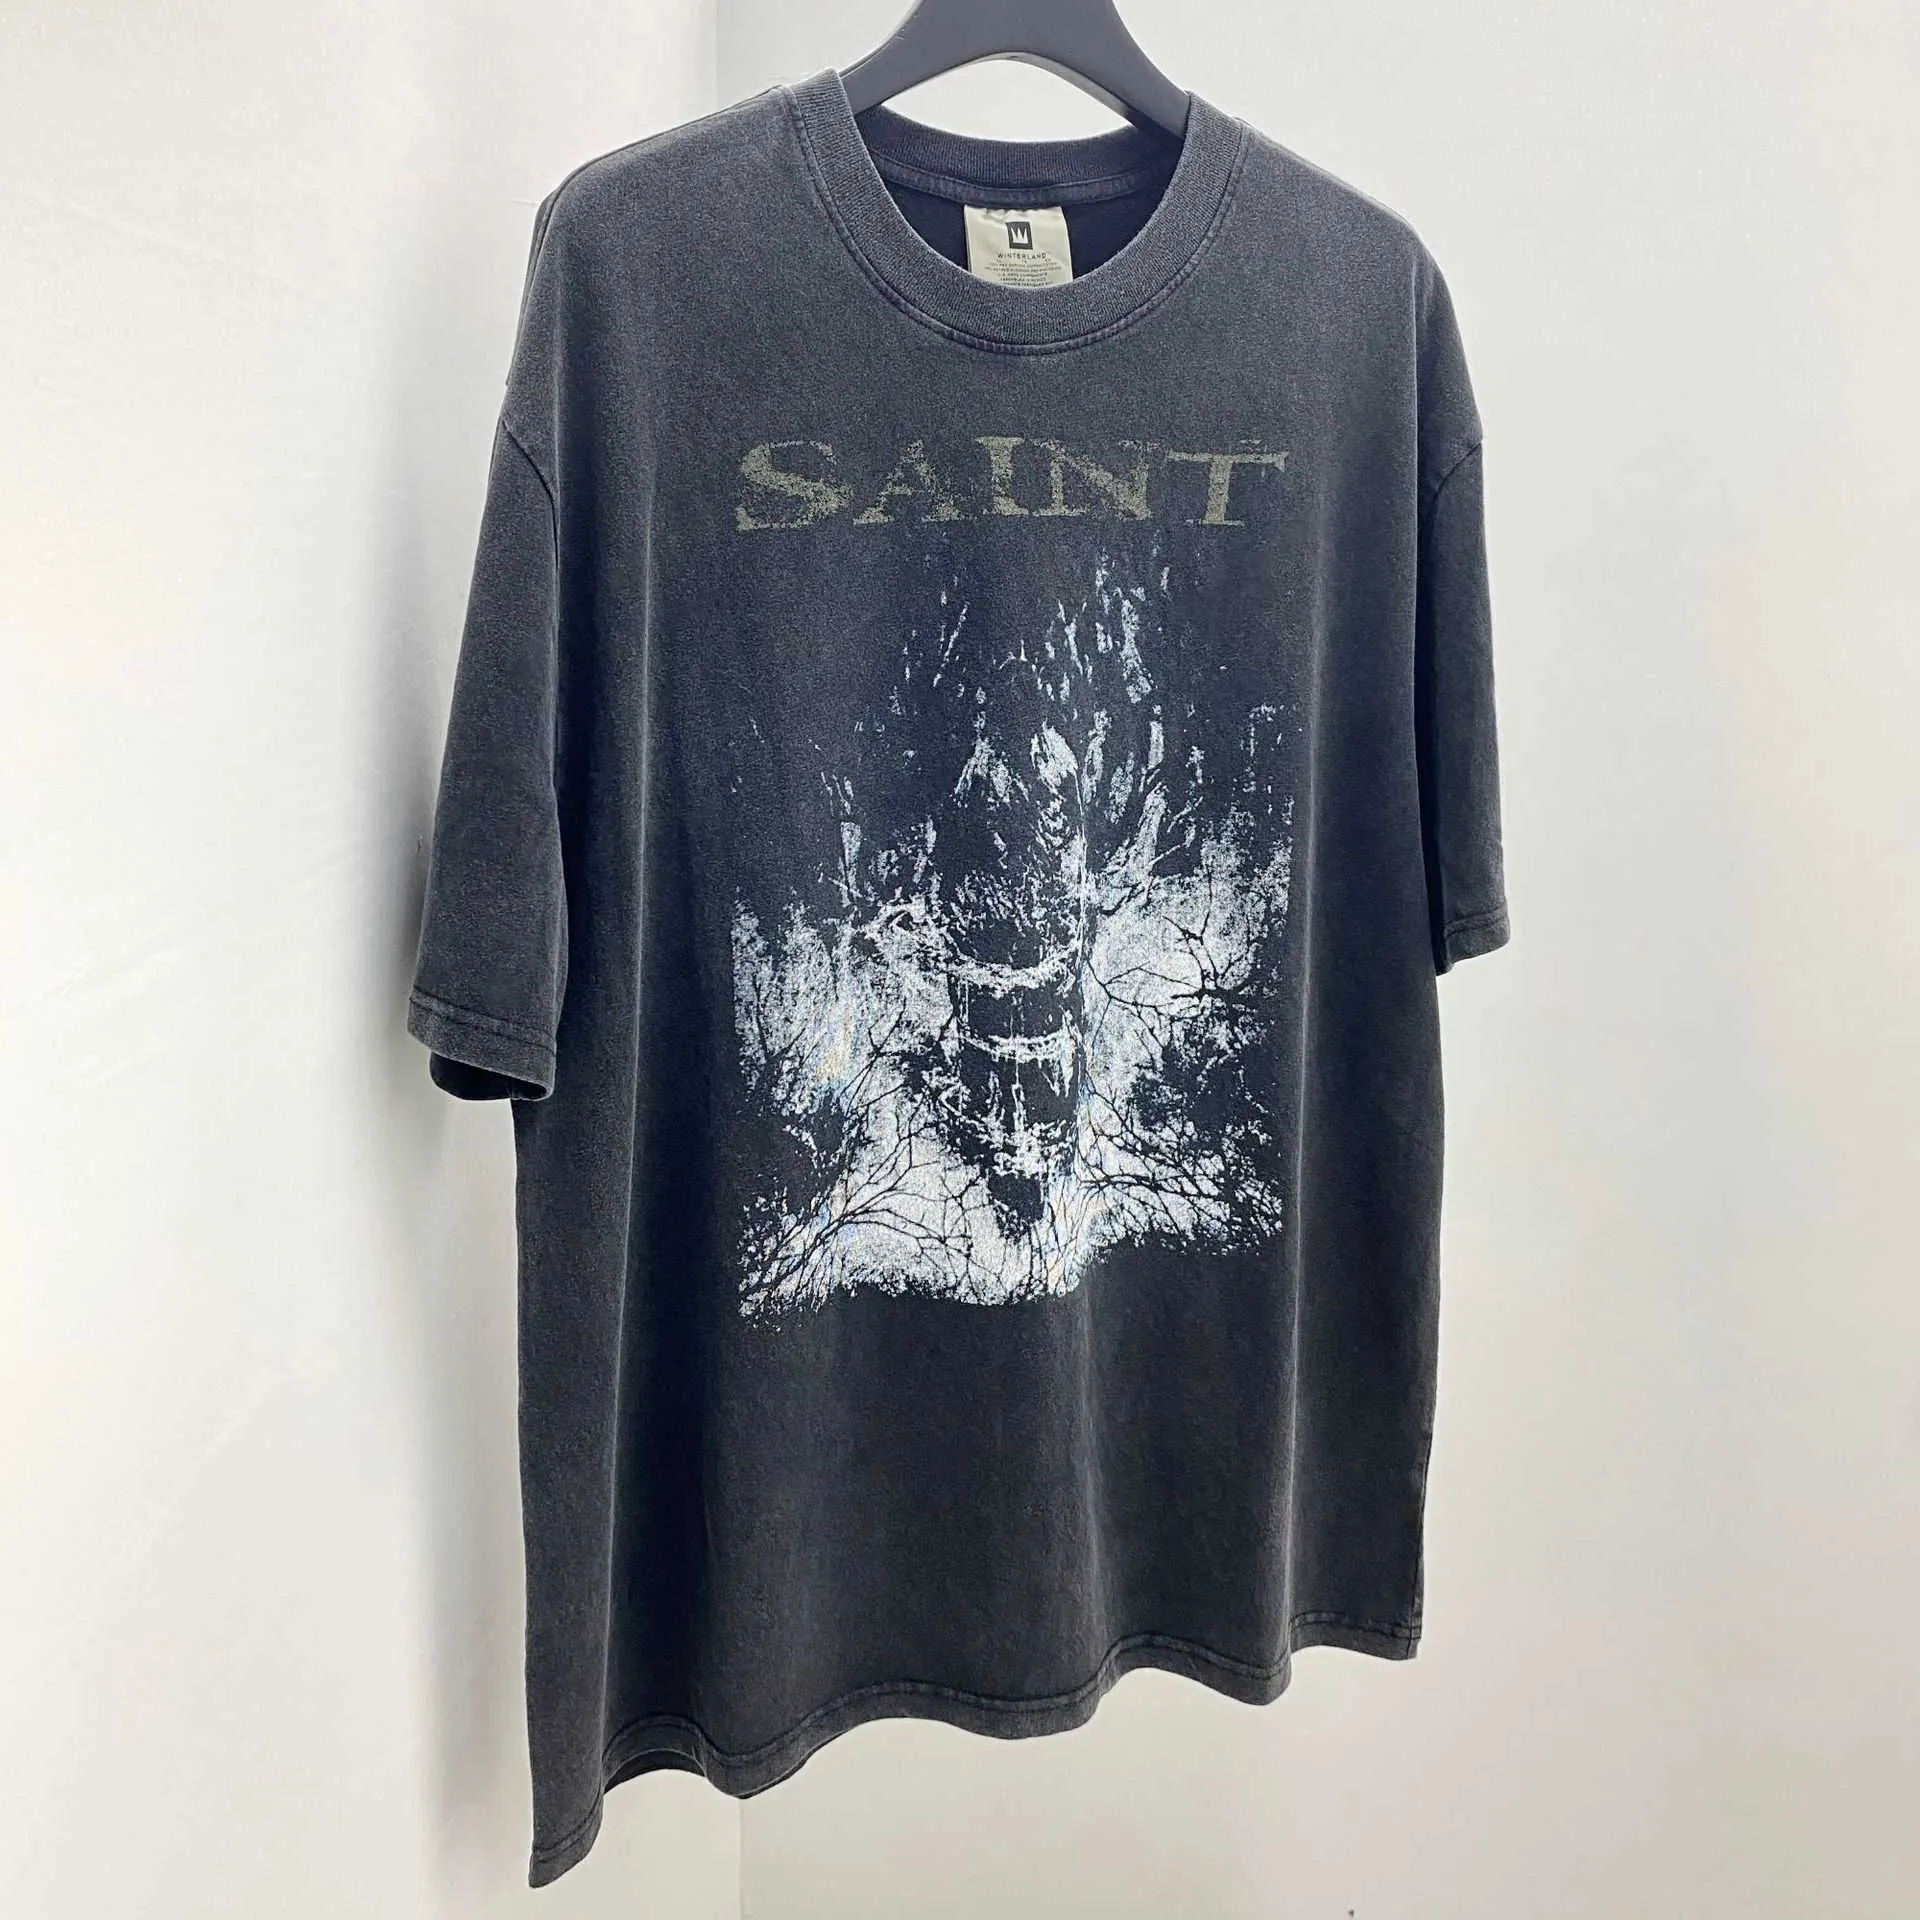 Wrgi New Style T-shirts para hombres y mujeres Diseñador de moda Saint Michael Star's Same Small Brand Dark Limited High Street Old Washed